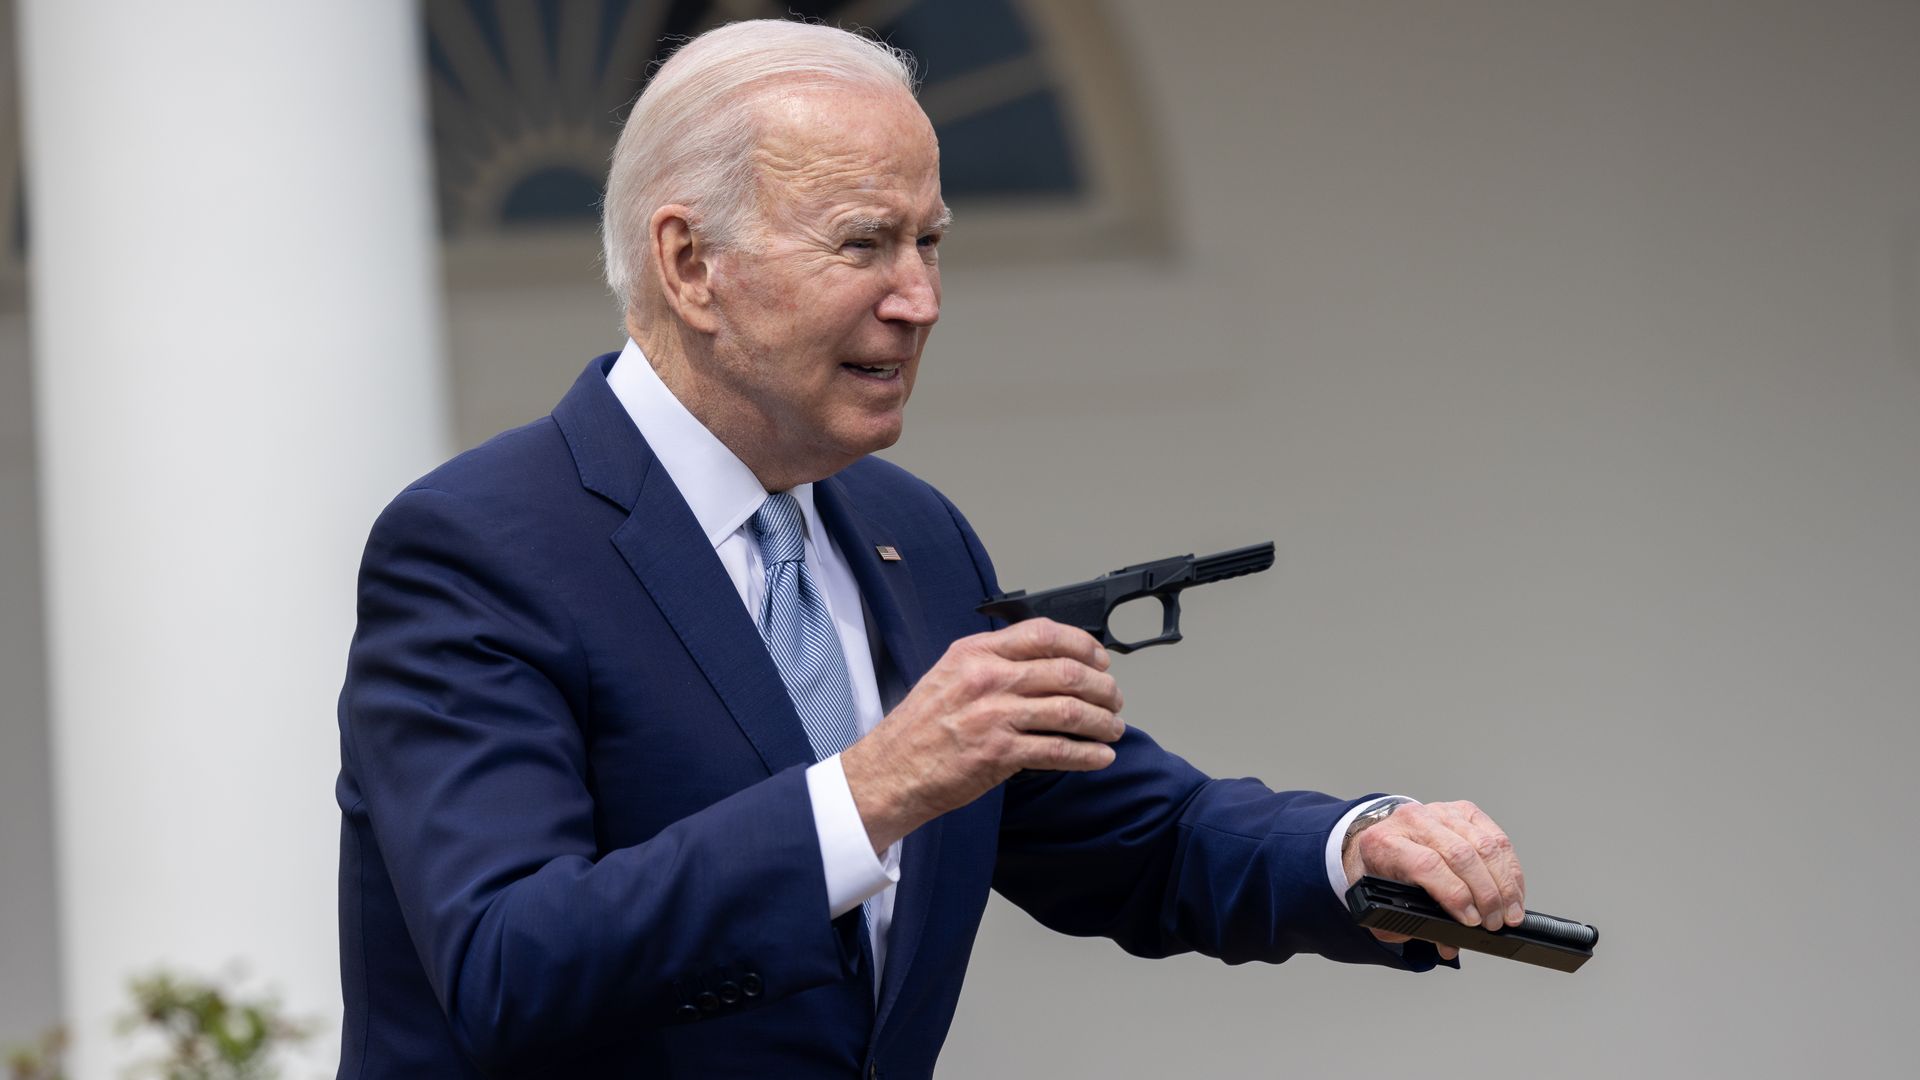 President Biden holds up pieces of a "ghost gun" kit on April 11.